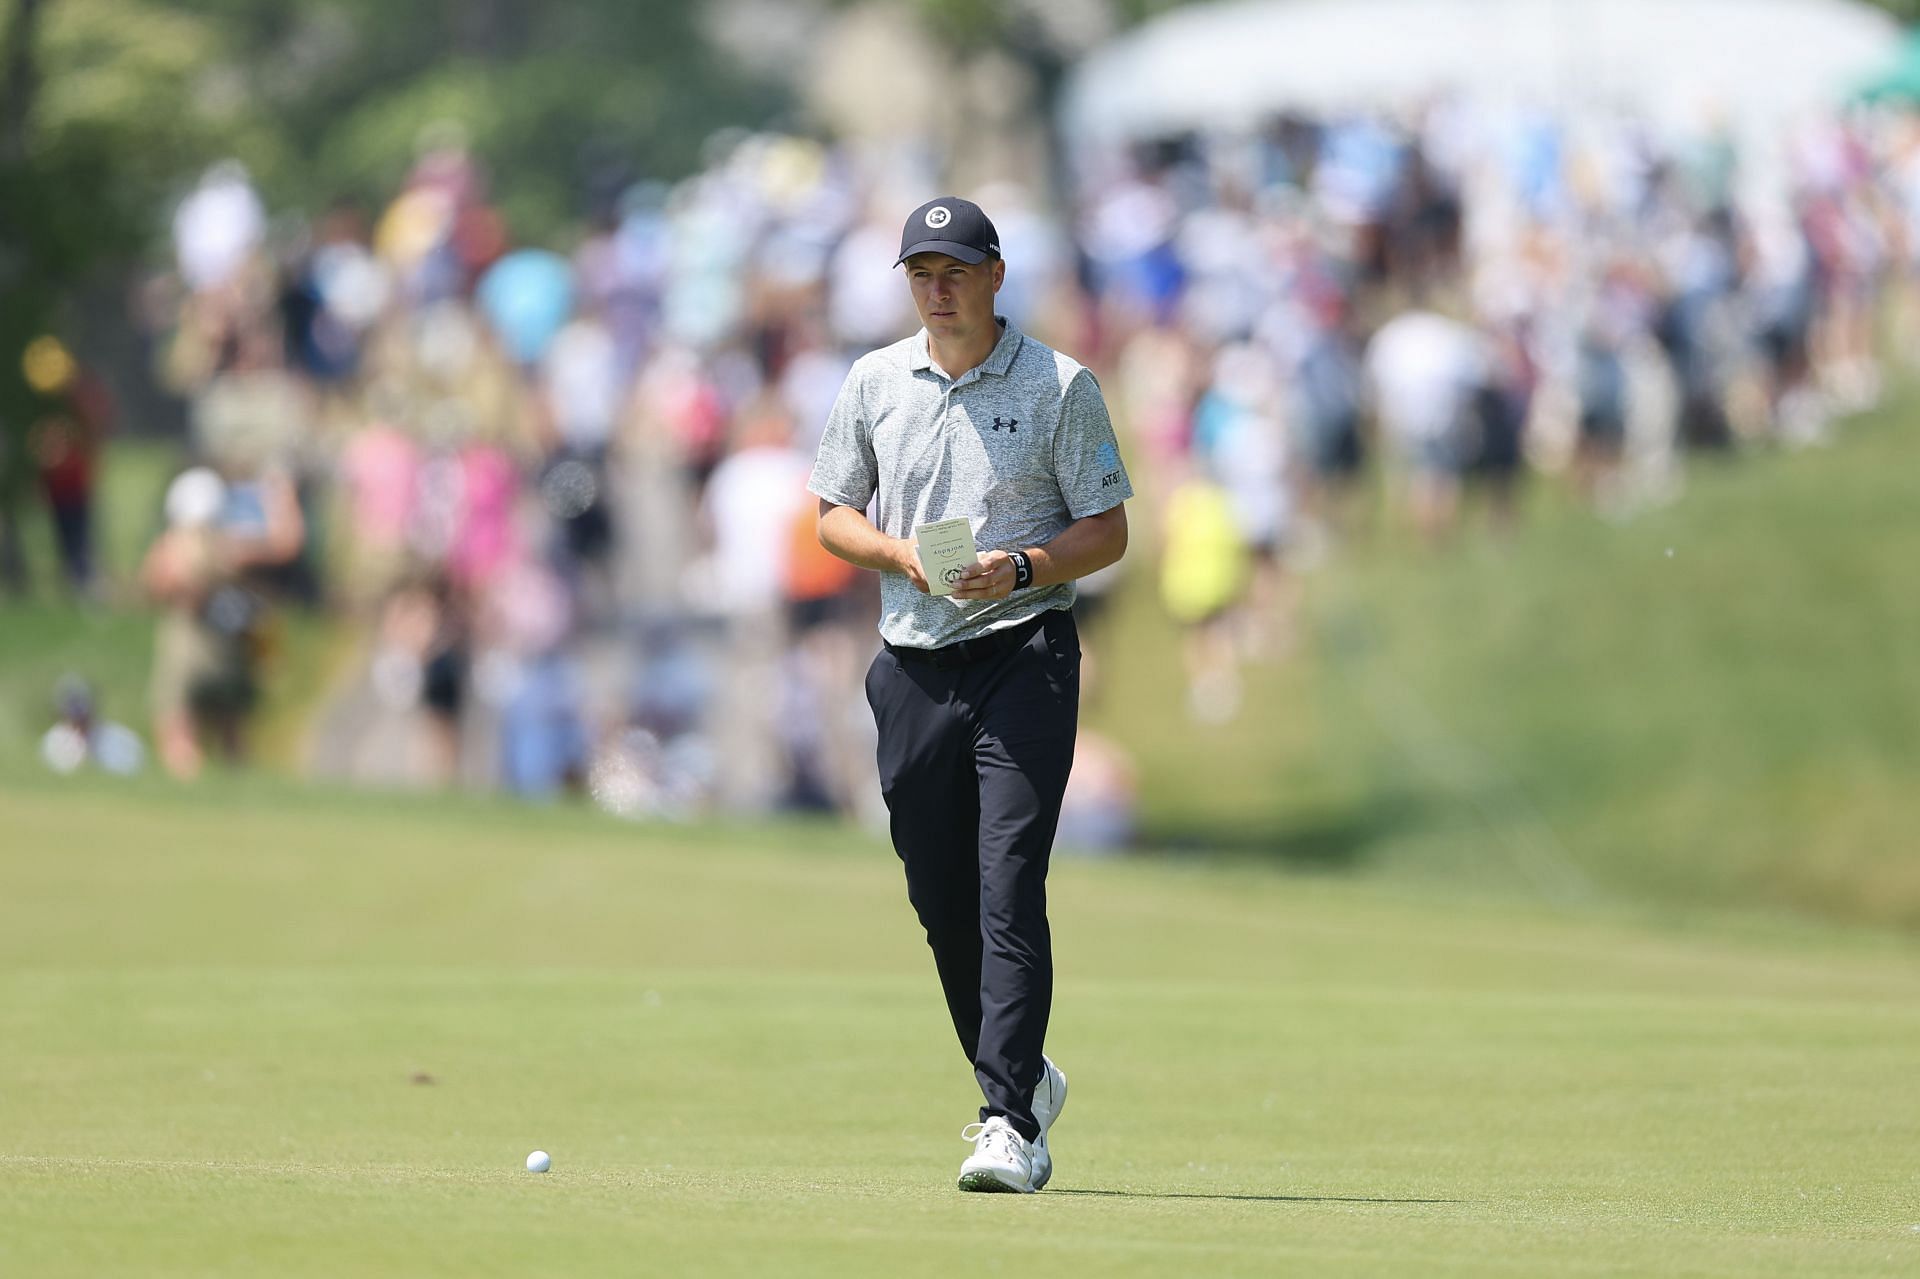 Jordan Spieth played well at the Memorial Tournament